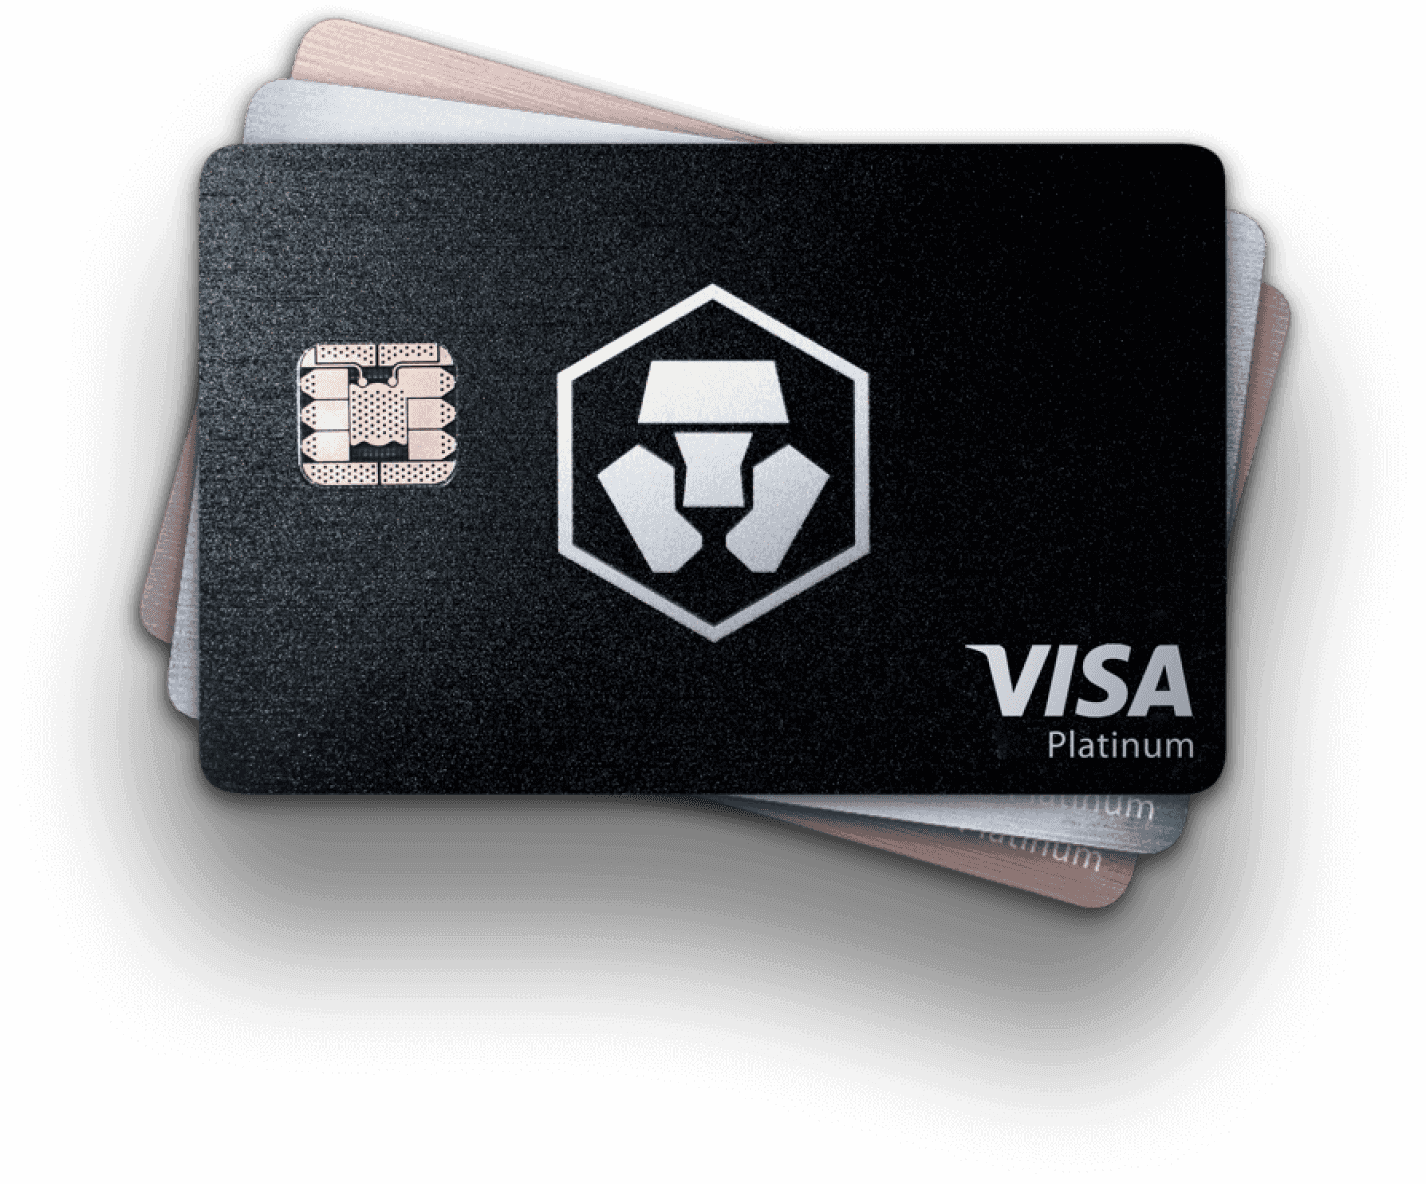 what can i buy with crypto.com visa card